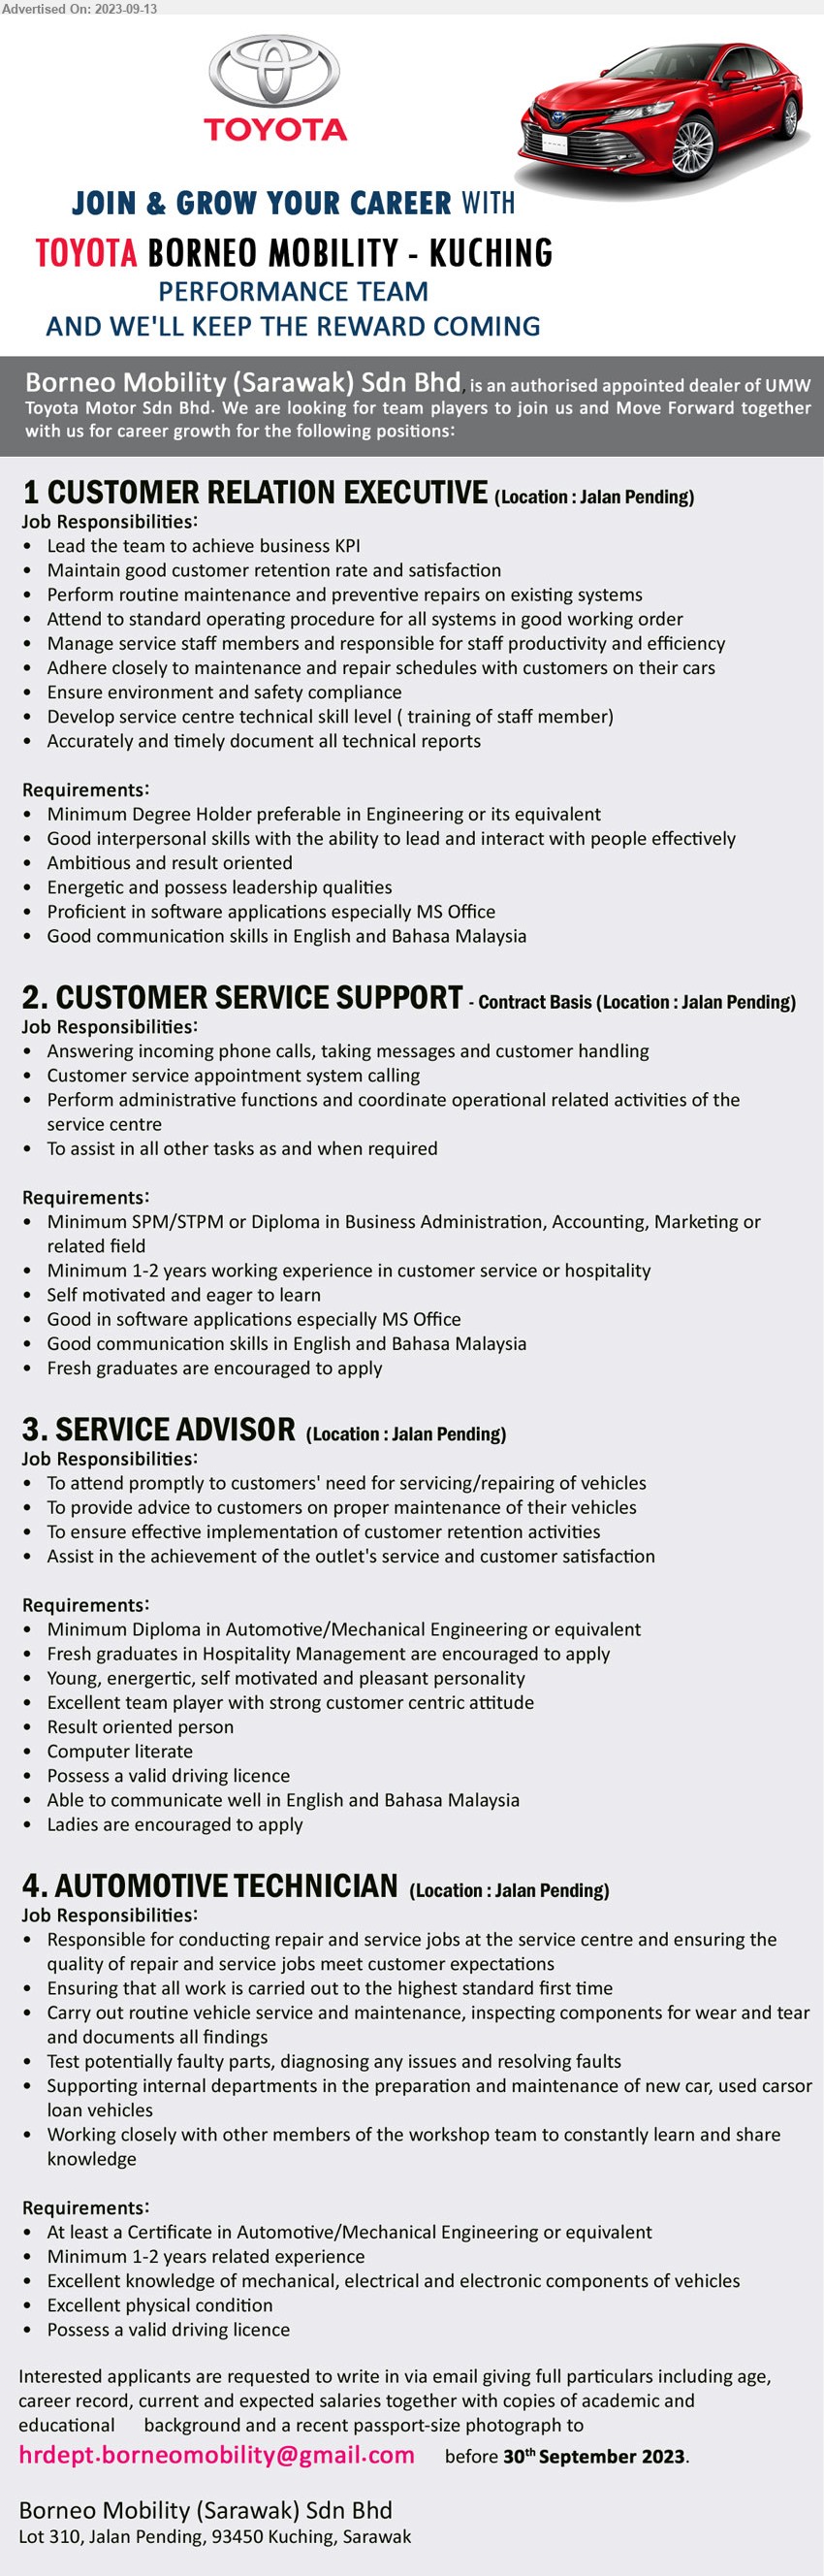 BORNEO MOBILITY (SARAWAK) SDN BHD - 1. CUSTOMER RELATION EXECUTIVE (Kuching), Degree Holder preferable in Engineering, Proficient in software applications especially MS Office,...
2. CUSTOMER SERVICE SUPPORT (Kuching), SPM/STPM or Diploma in Business Administration, Accounting, Marketing,...
3. SERVICE ADVISOR (Kuching), Diploma in Automotive/Mechanical Engineering, Computer literate	,...
4. AUTOMOTIVE TECHNICIAN (Kuching), Certificate in Automotive/Mechanical Engineering, 1-2 yrs. exp.,...
Email resume to ...